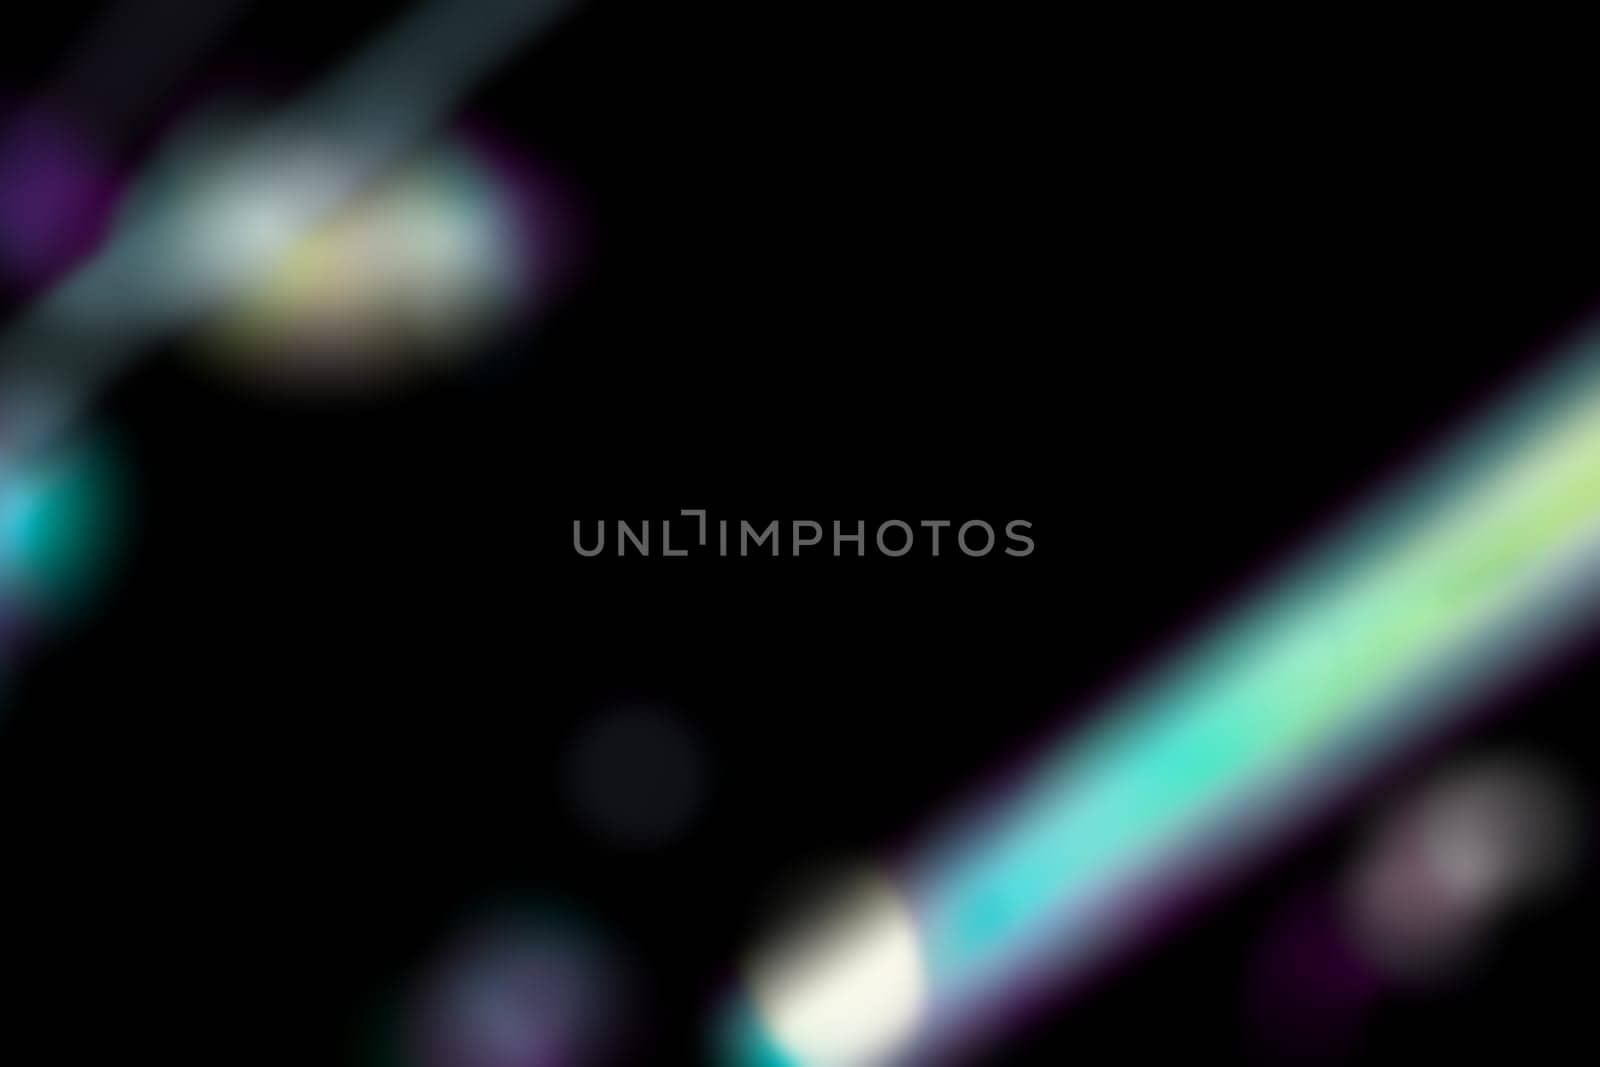 Dynamic lens flare and rainbow prism effect on black background. Colorful, blurred lights. Holographic reflection. Abstract, multicolor overlay effect. Color gradient, y2k style. 3D render